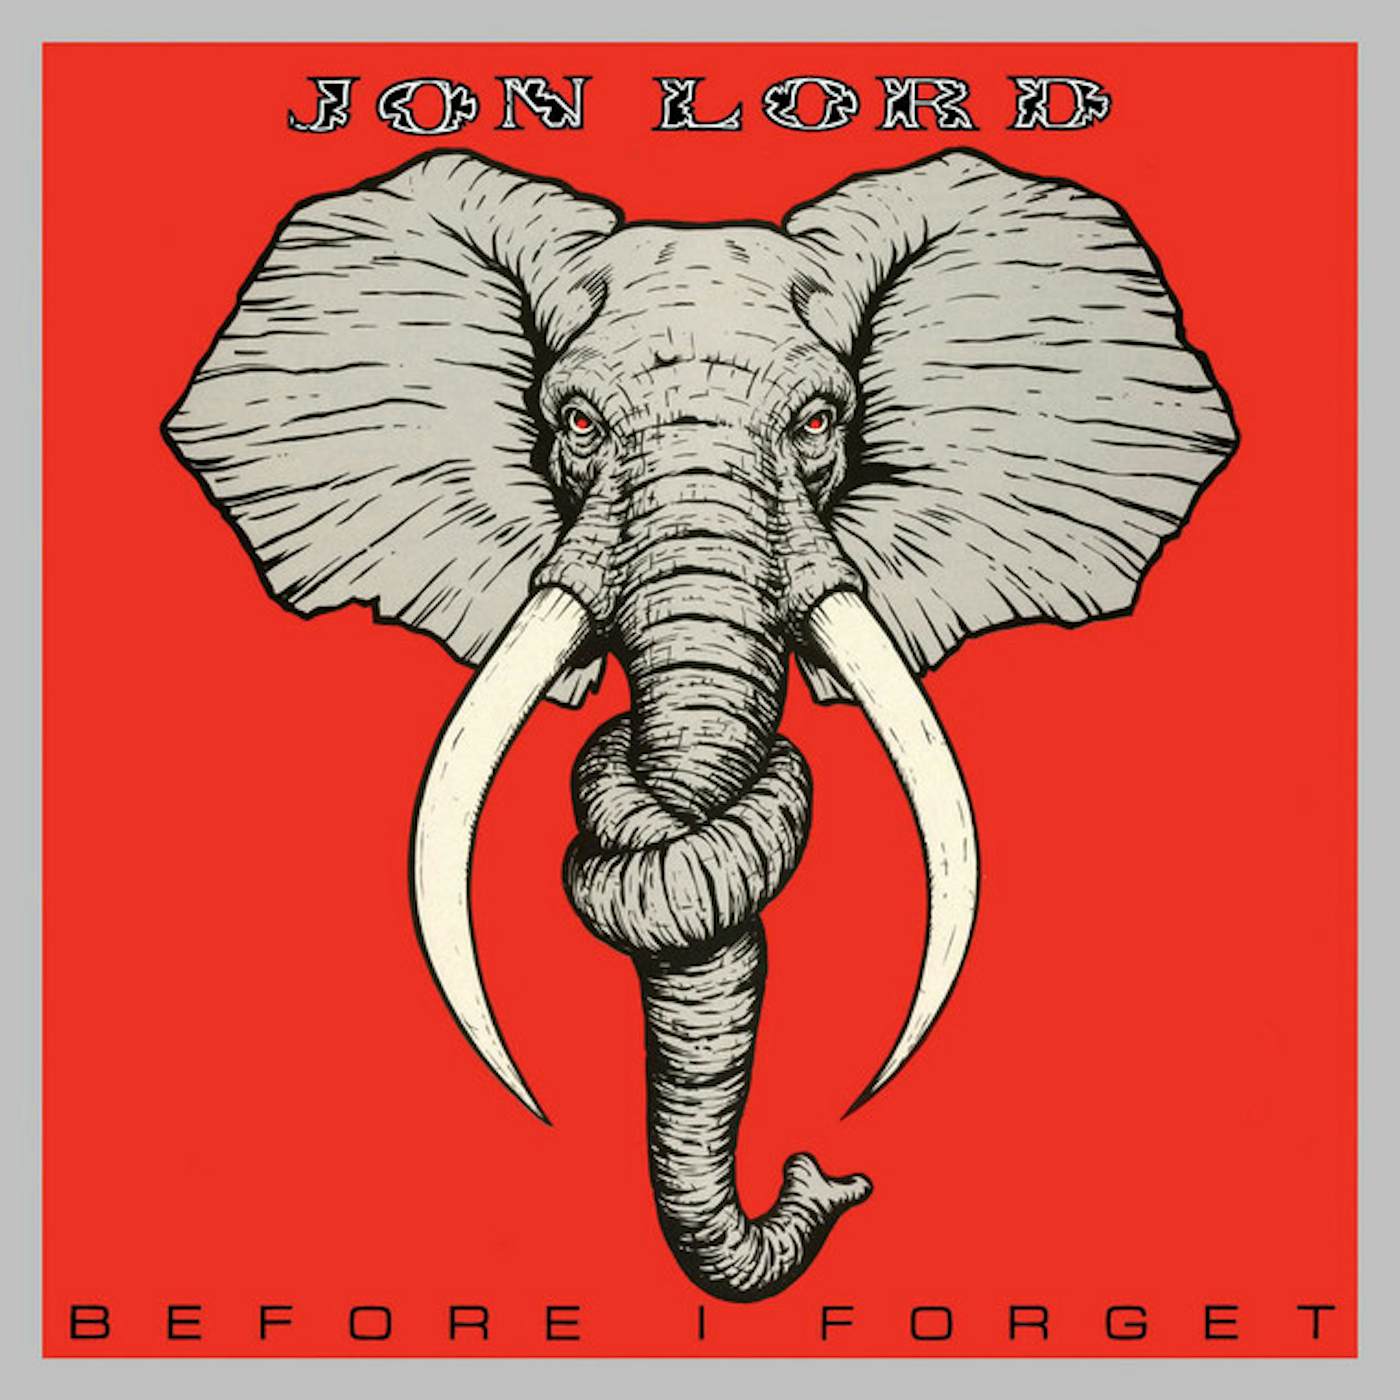 Jon Lord BEFORE I FORGET (RE-ISSUE) CD